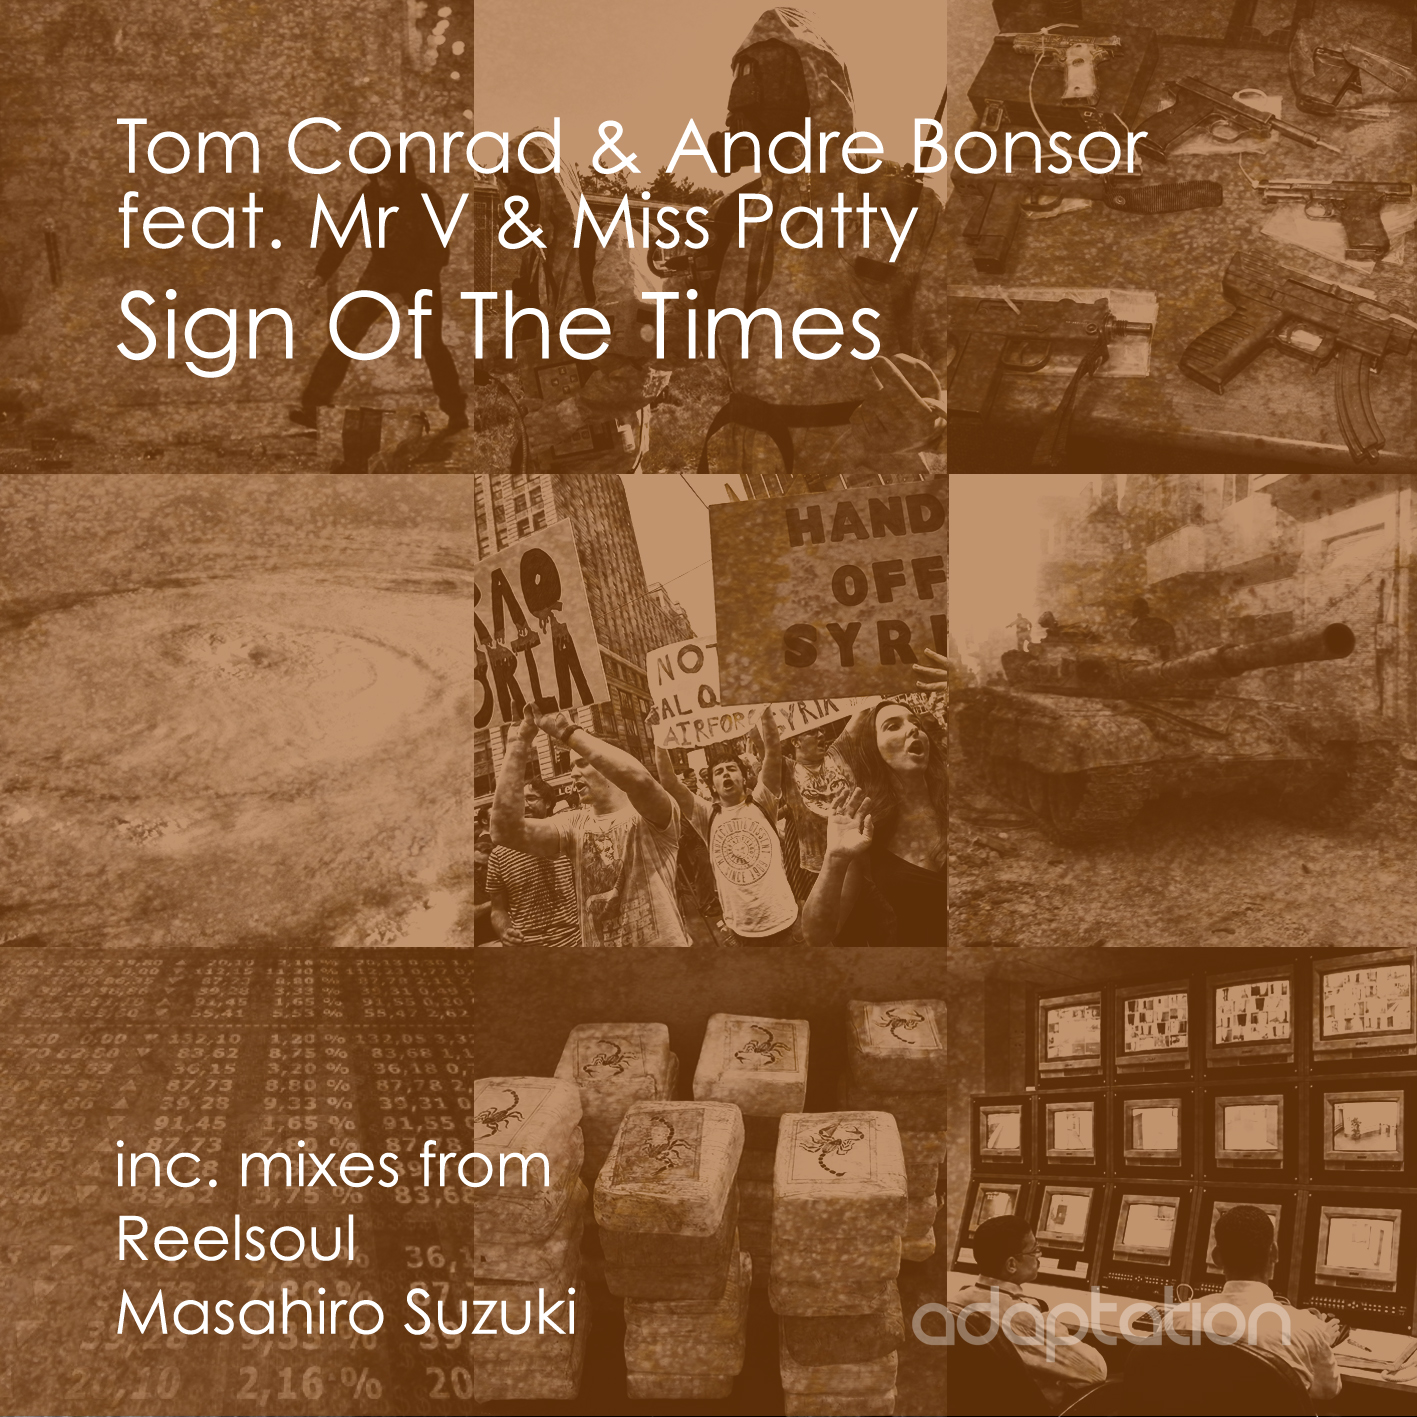 Tom Conrad & Andre Bonsor - Sign Of The Times